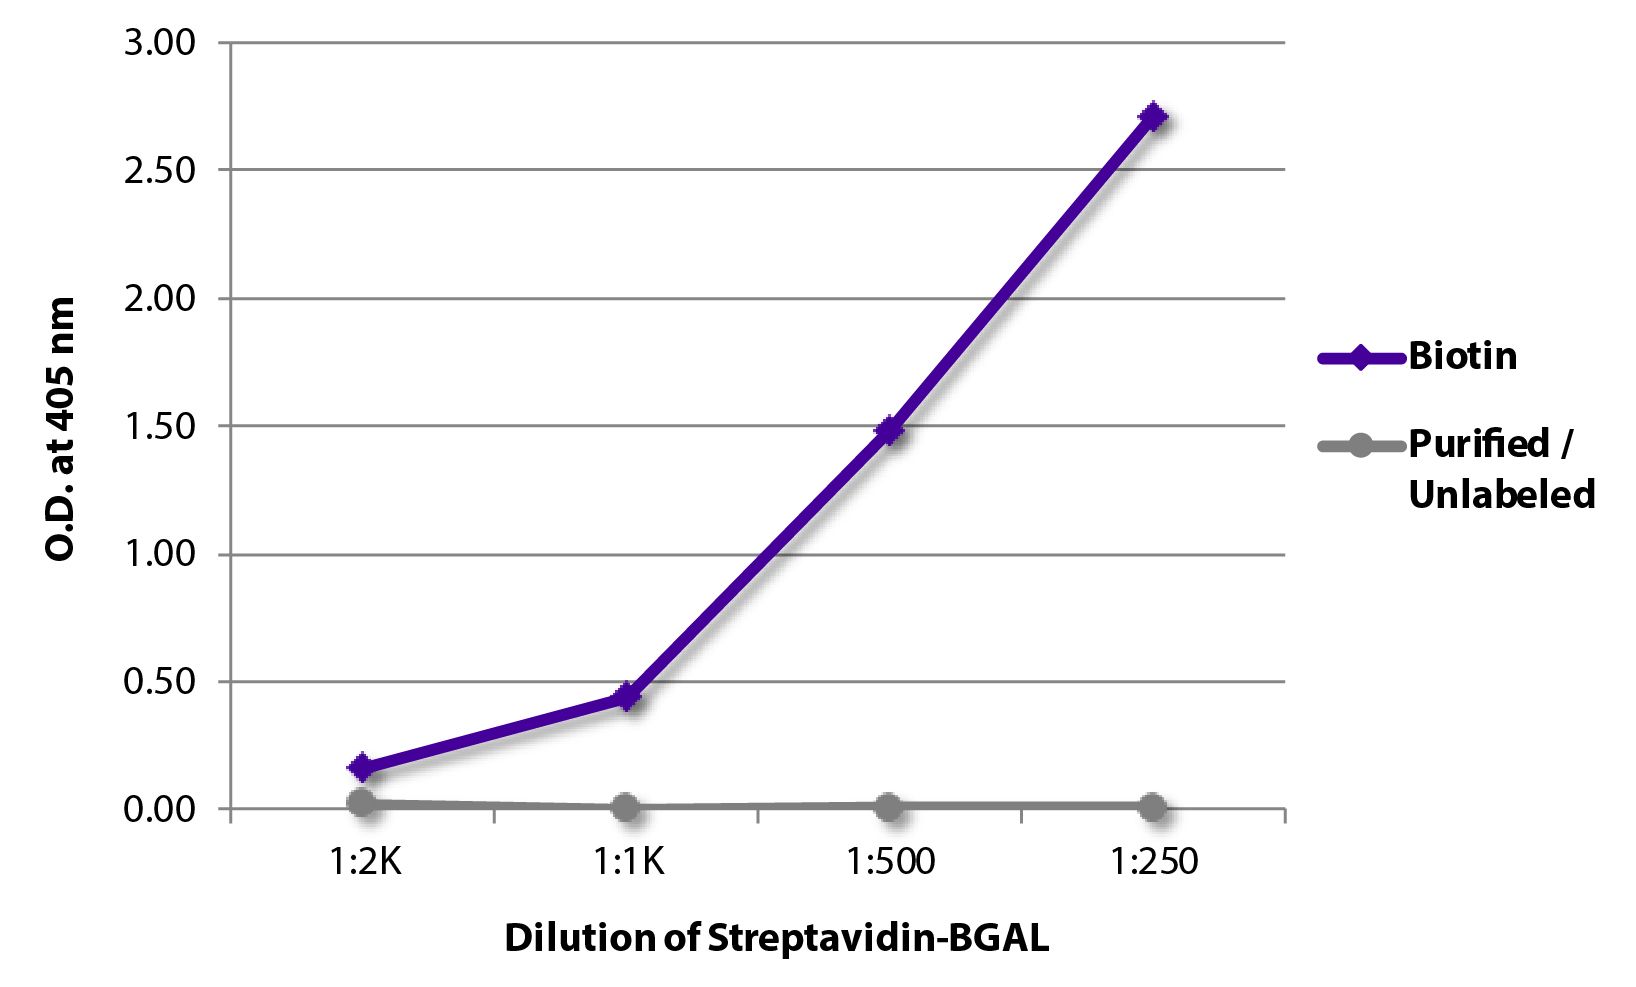 ELISA plate was coated with Goat Anti-Human IgG-BIOT (SB Cat. No. 2040-08) and purified/unlabeled Rat IgG<sub>1</sub>κ.  Biotin conjugated antibody and purified immunoglobulin were detected with serially diluted Streptavidin-BGAL (SB Cat. No. 7105-06).